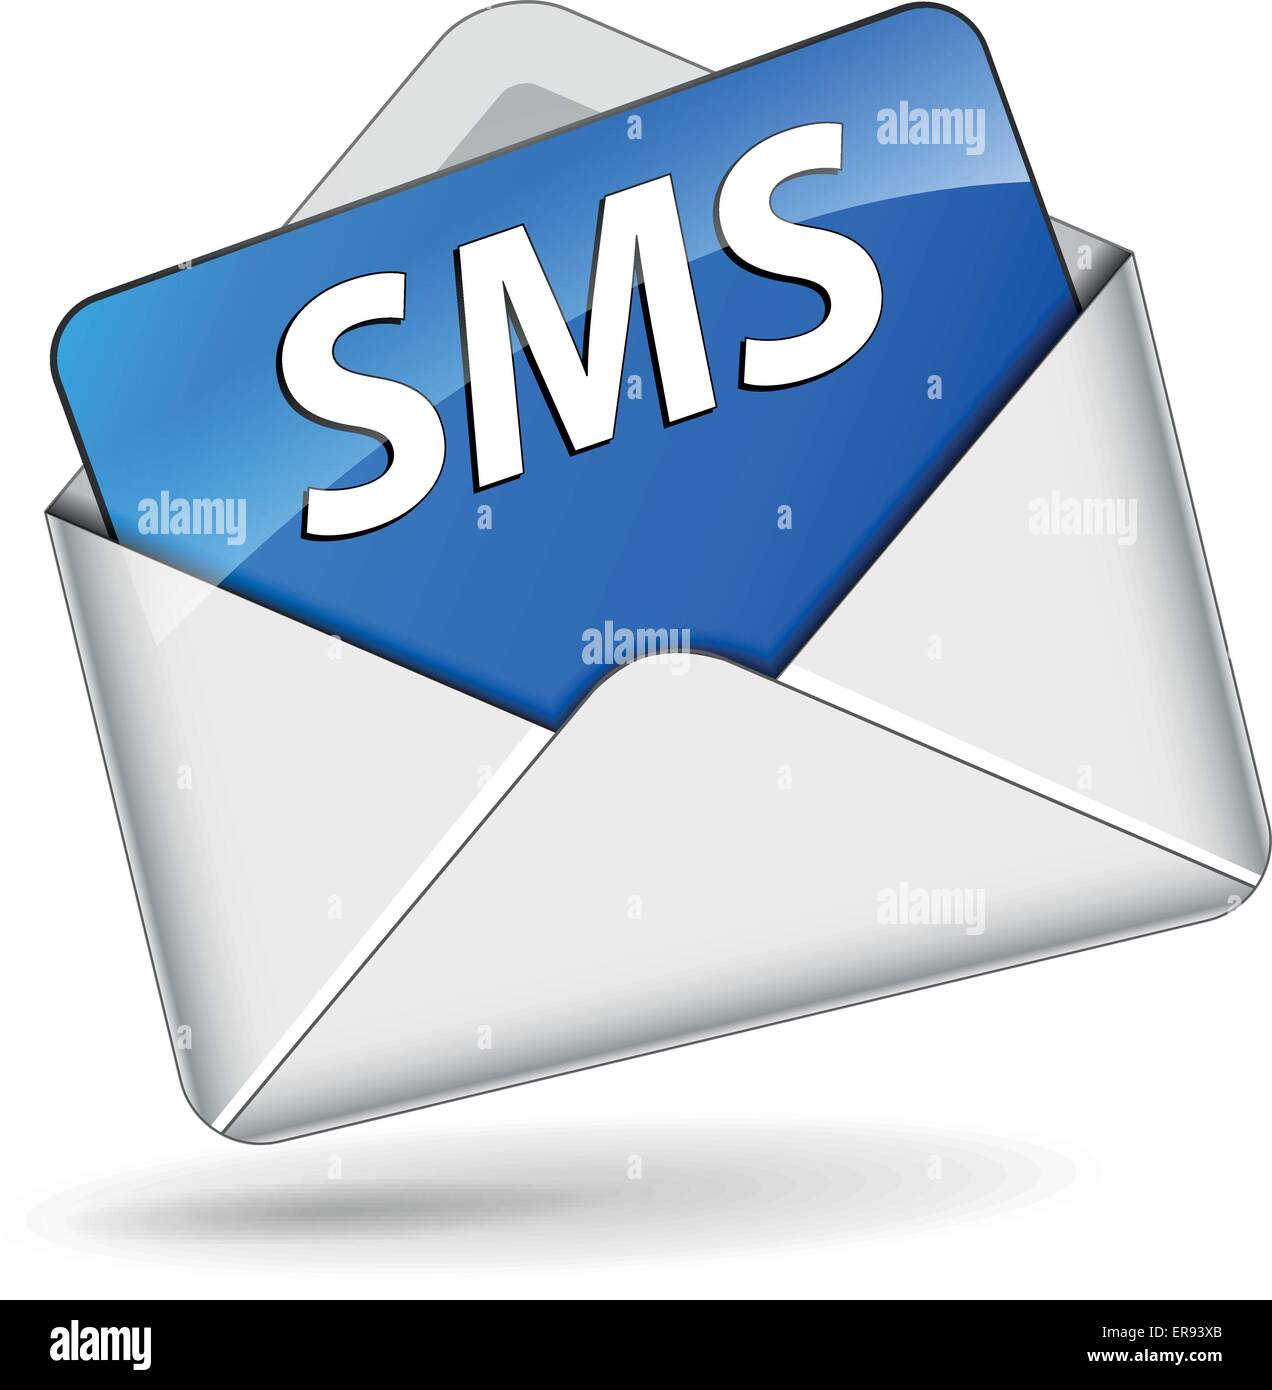 Vector illustration of sms envelope icon on white background Stock Vector